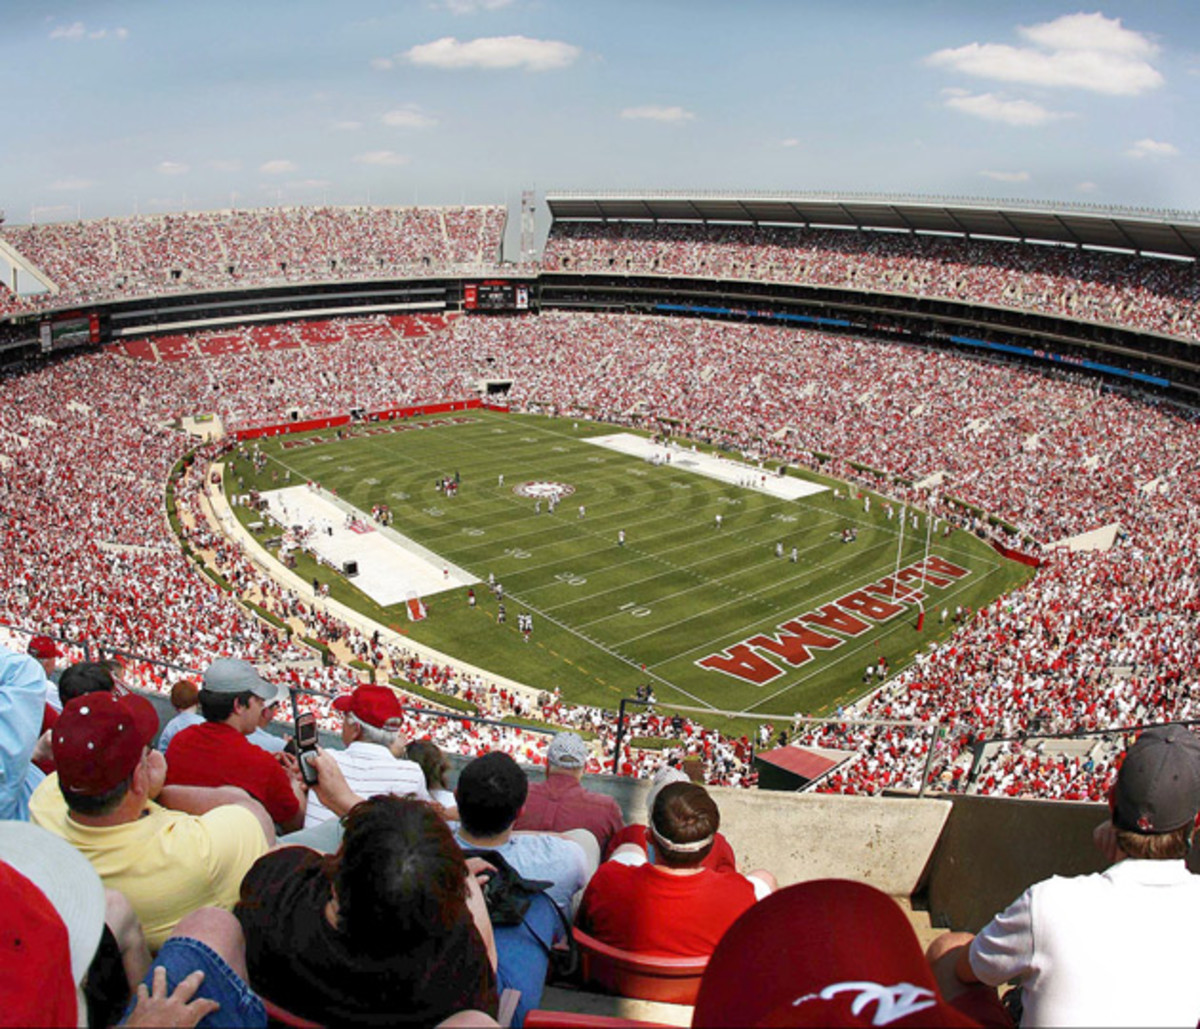 A record crowd of 92,000 people watched Nick Saban coach his first spring game at Bryant-Denny Stadium.